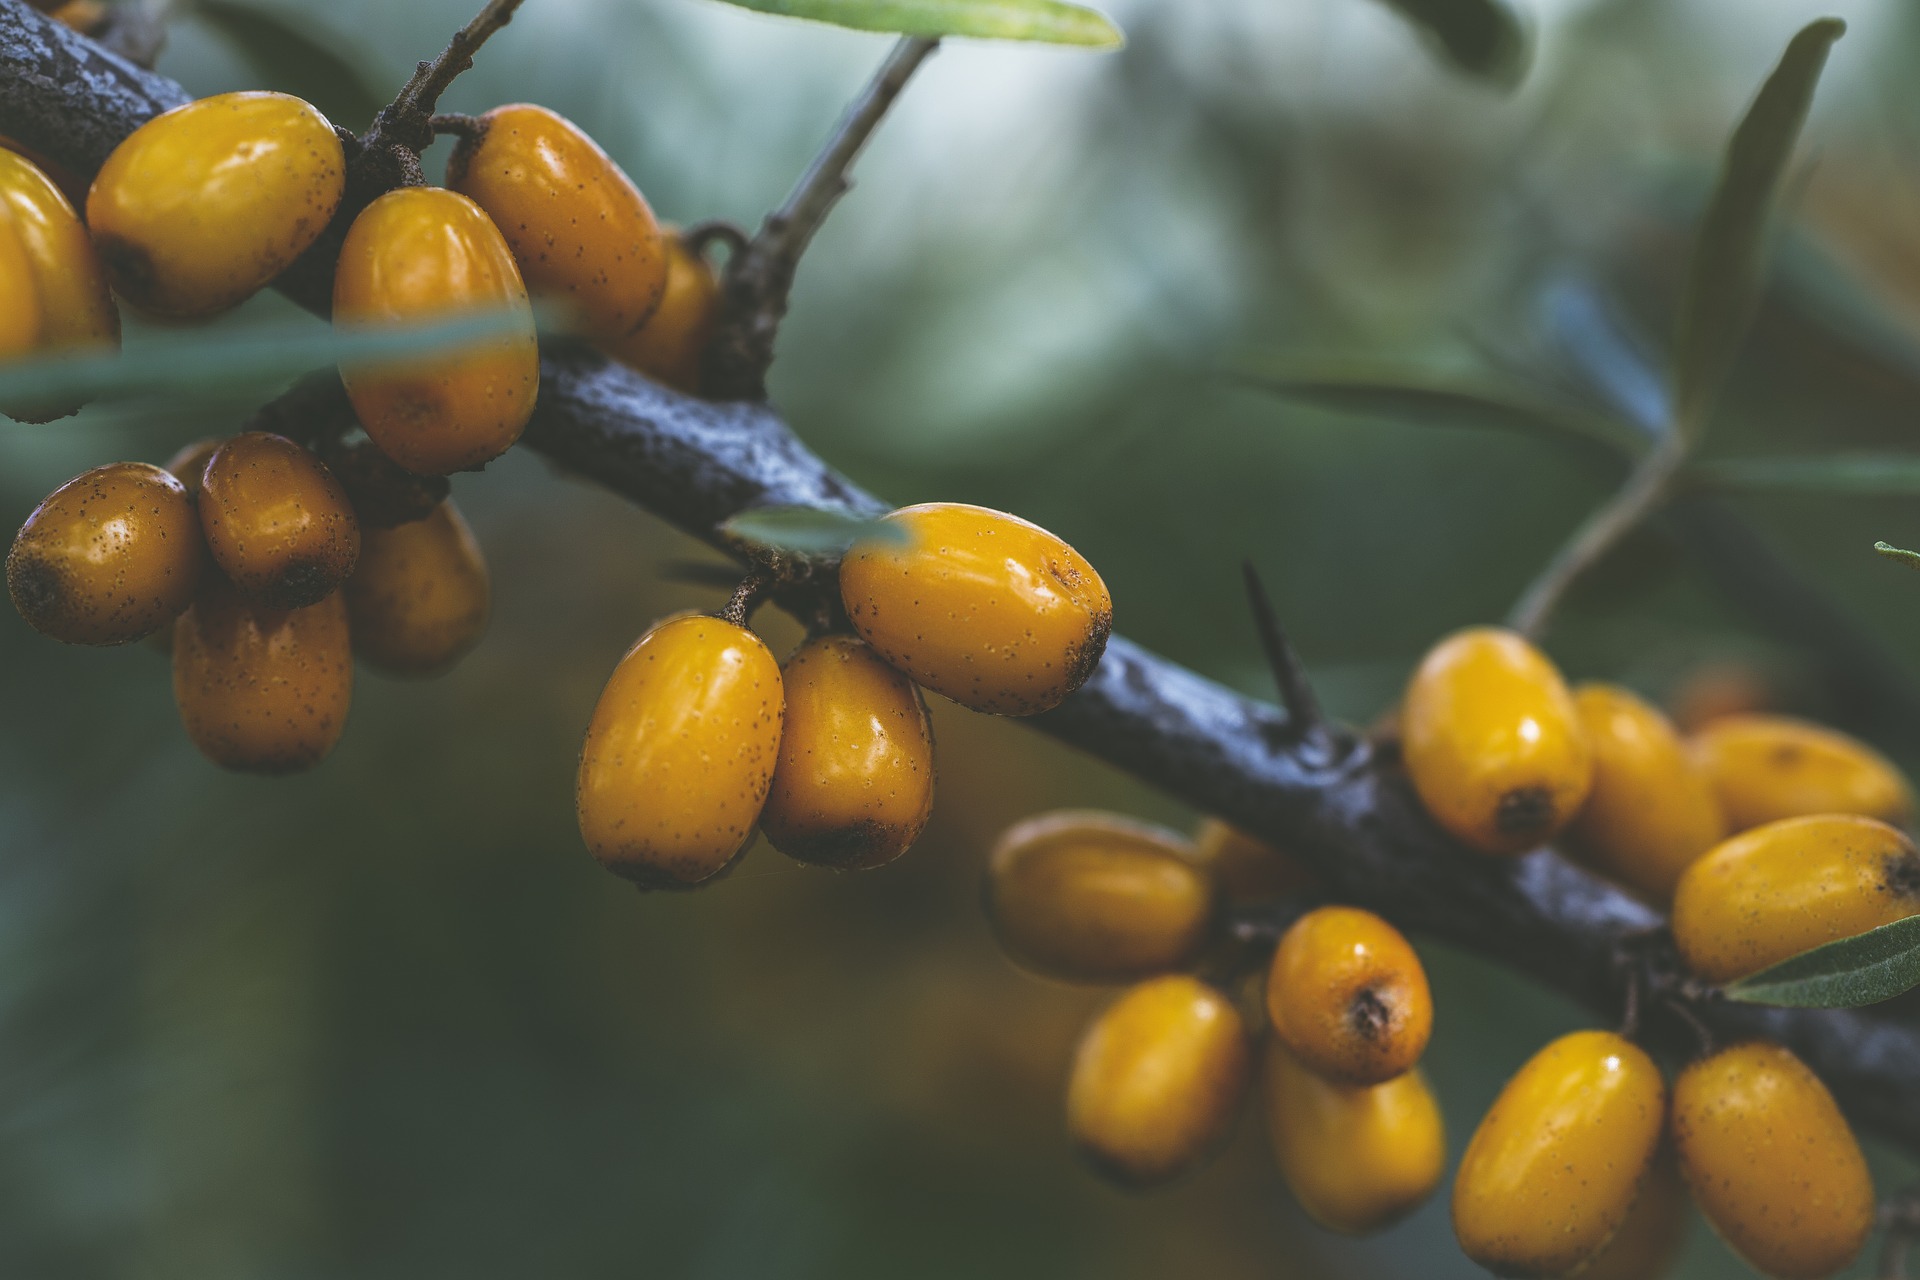 Sea Buckthorn Oil reduces wrinkles, fine lines and acne 